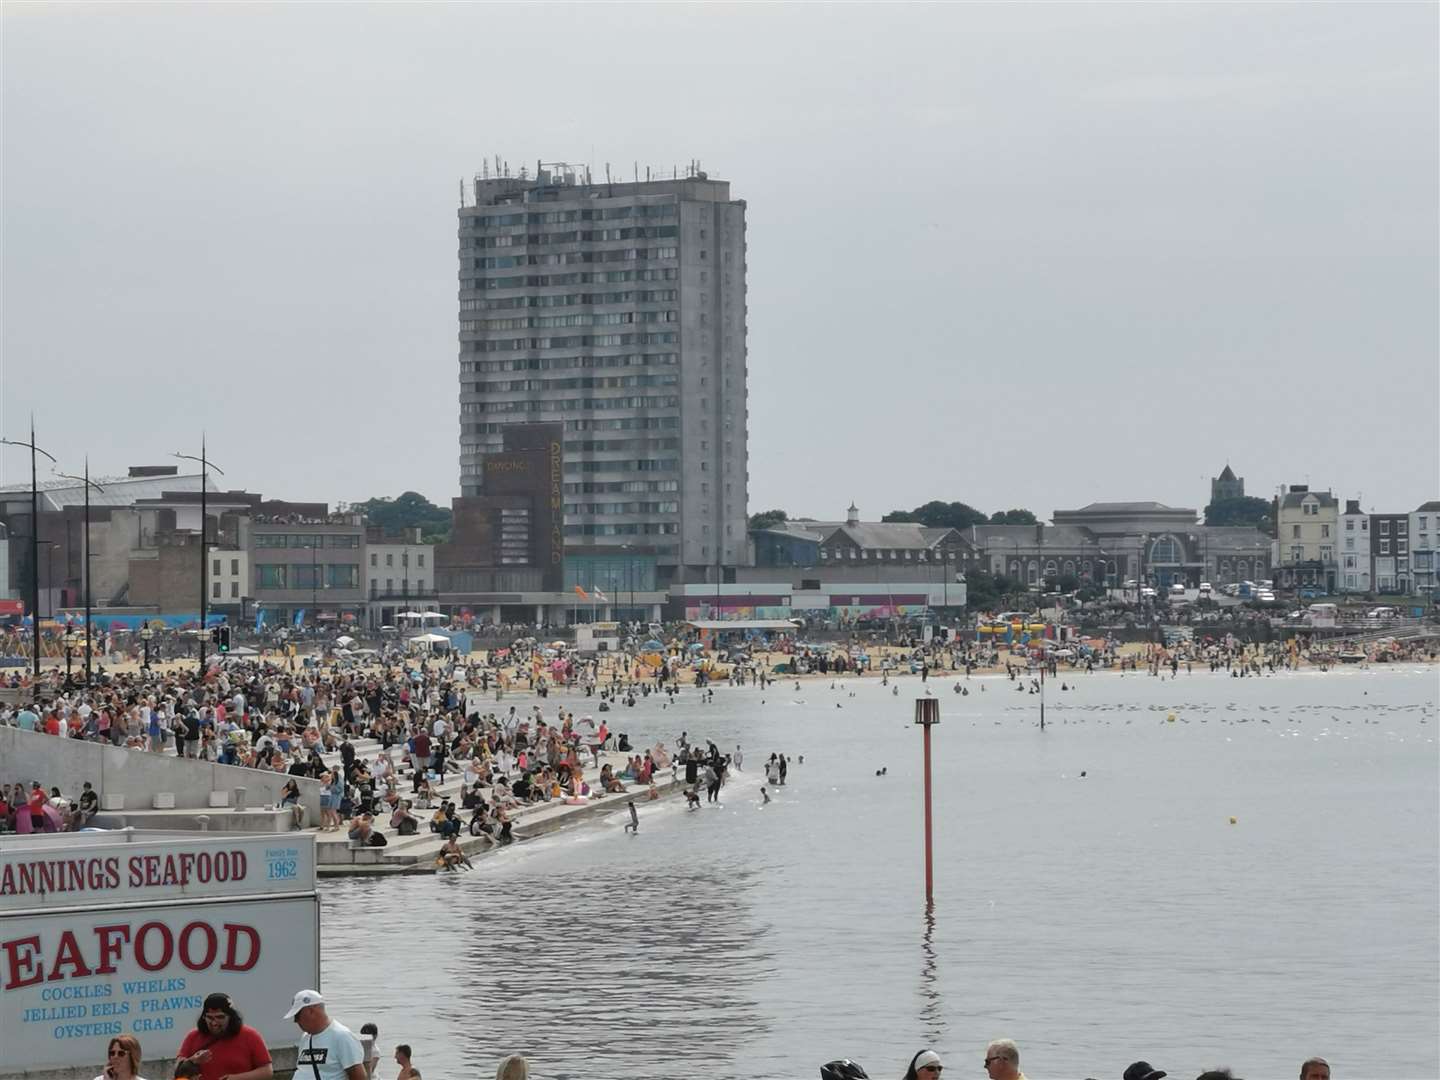 Margate has been ranked as one of the UK's worst coastal destinations